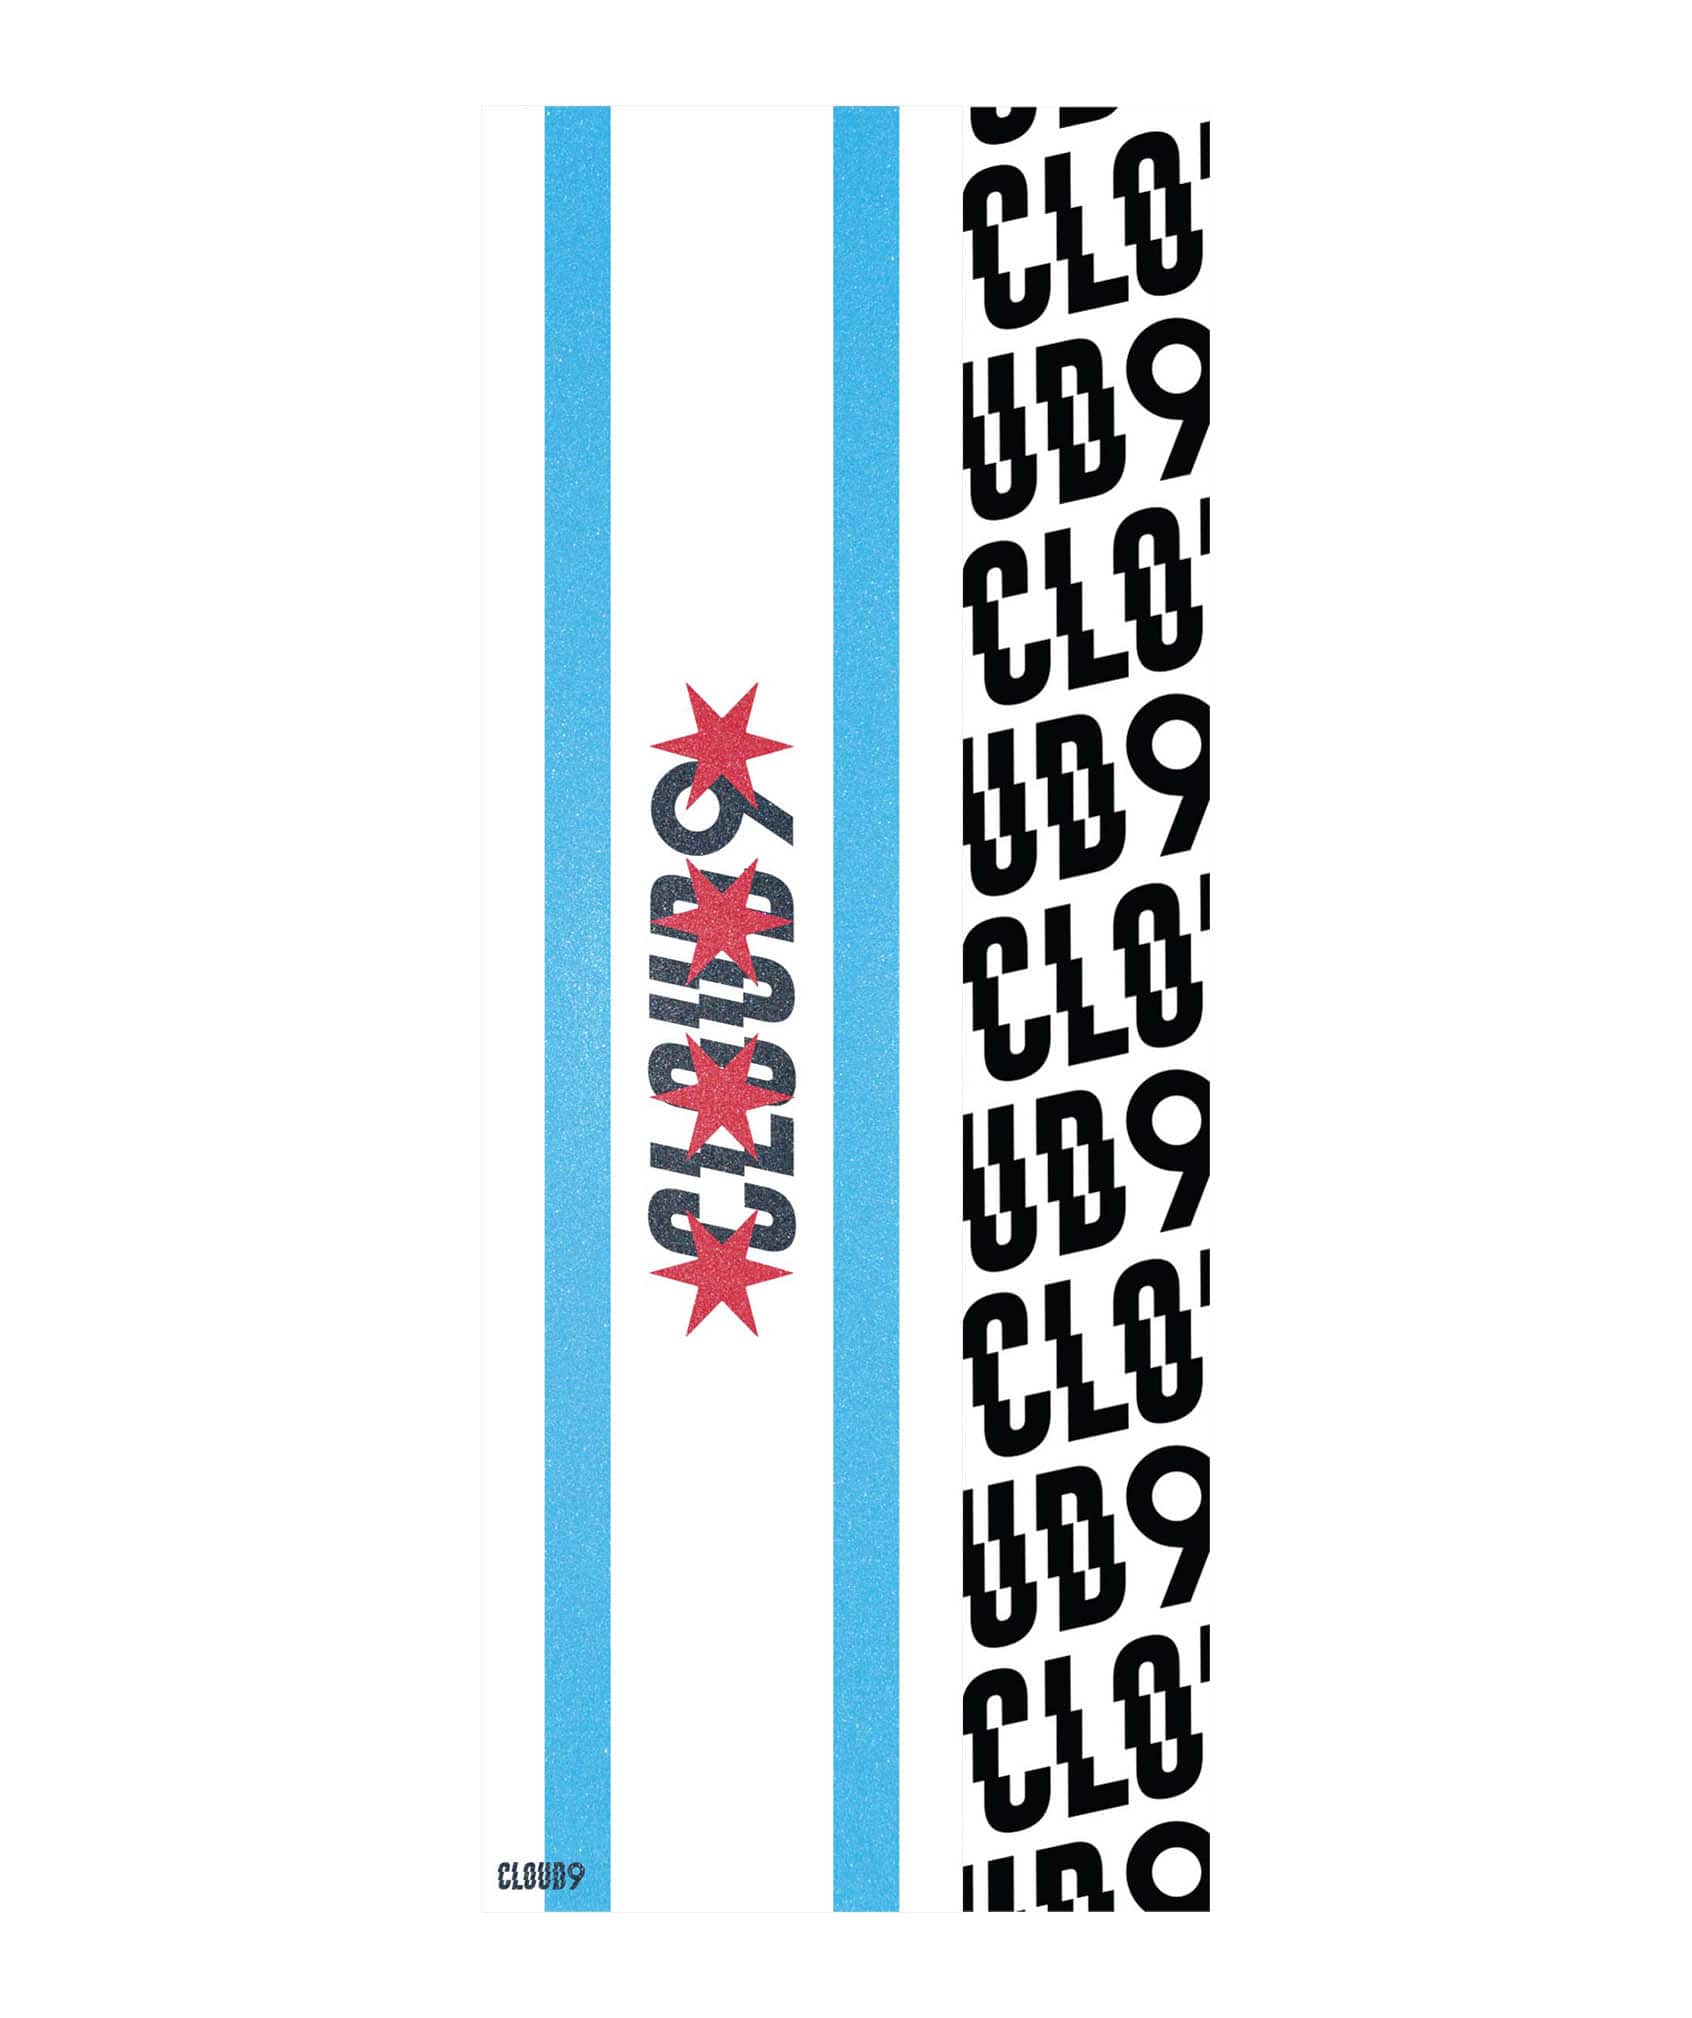 Shop All Cloud 9 Griptape Products Free Shipping